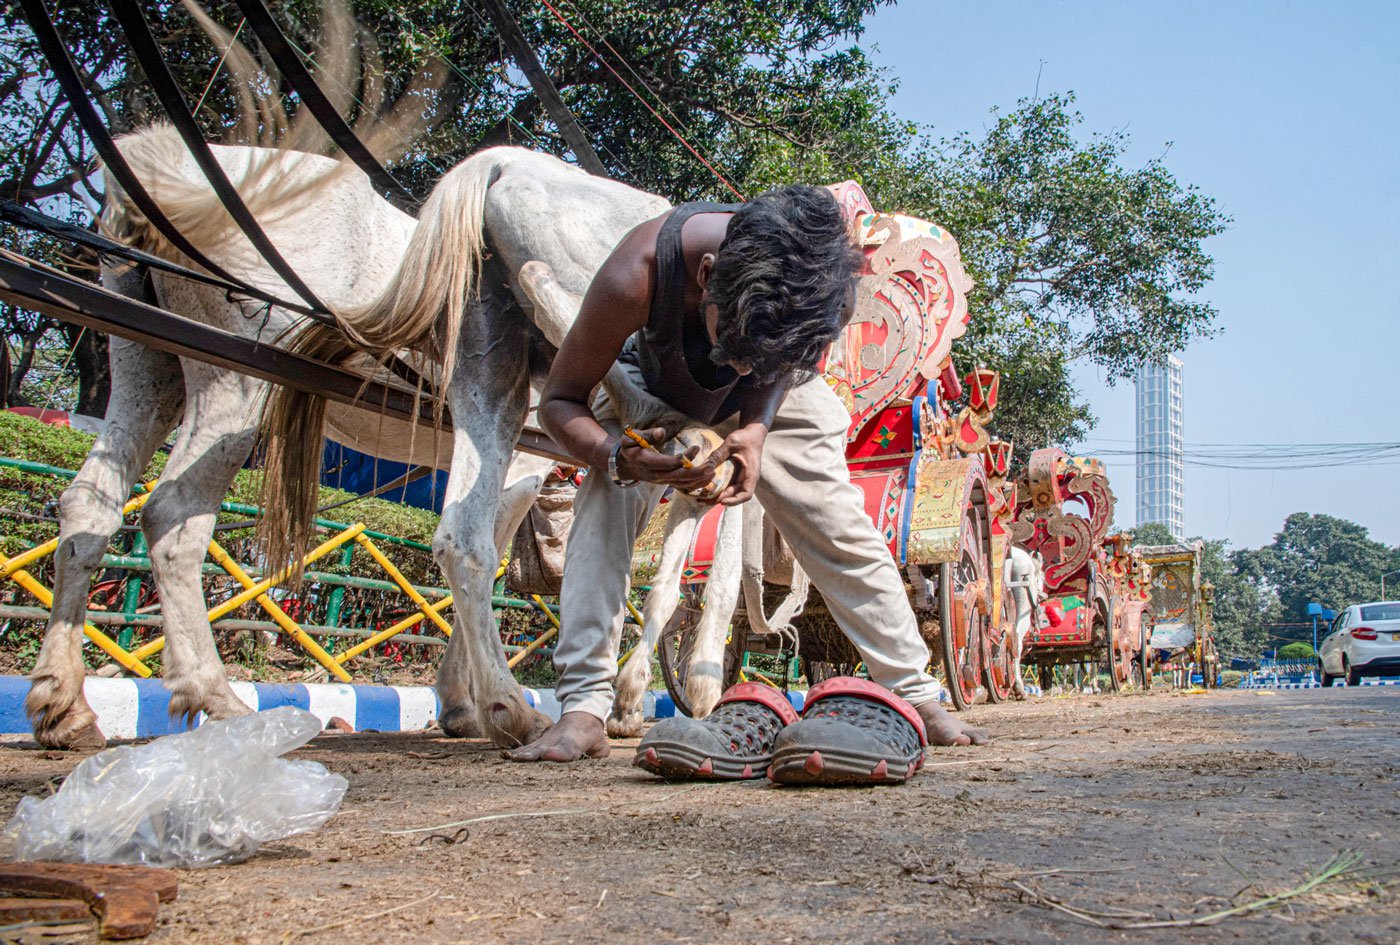 Right: Feeding and caring for the horses is key to his livelihood. Akif cleans and polishes the carriage after he arrives.  He charges Rs. 500 for a single ride